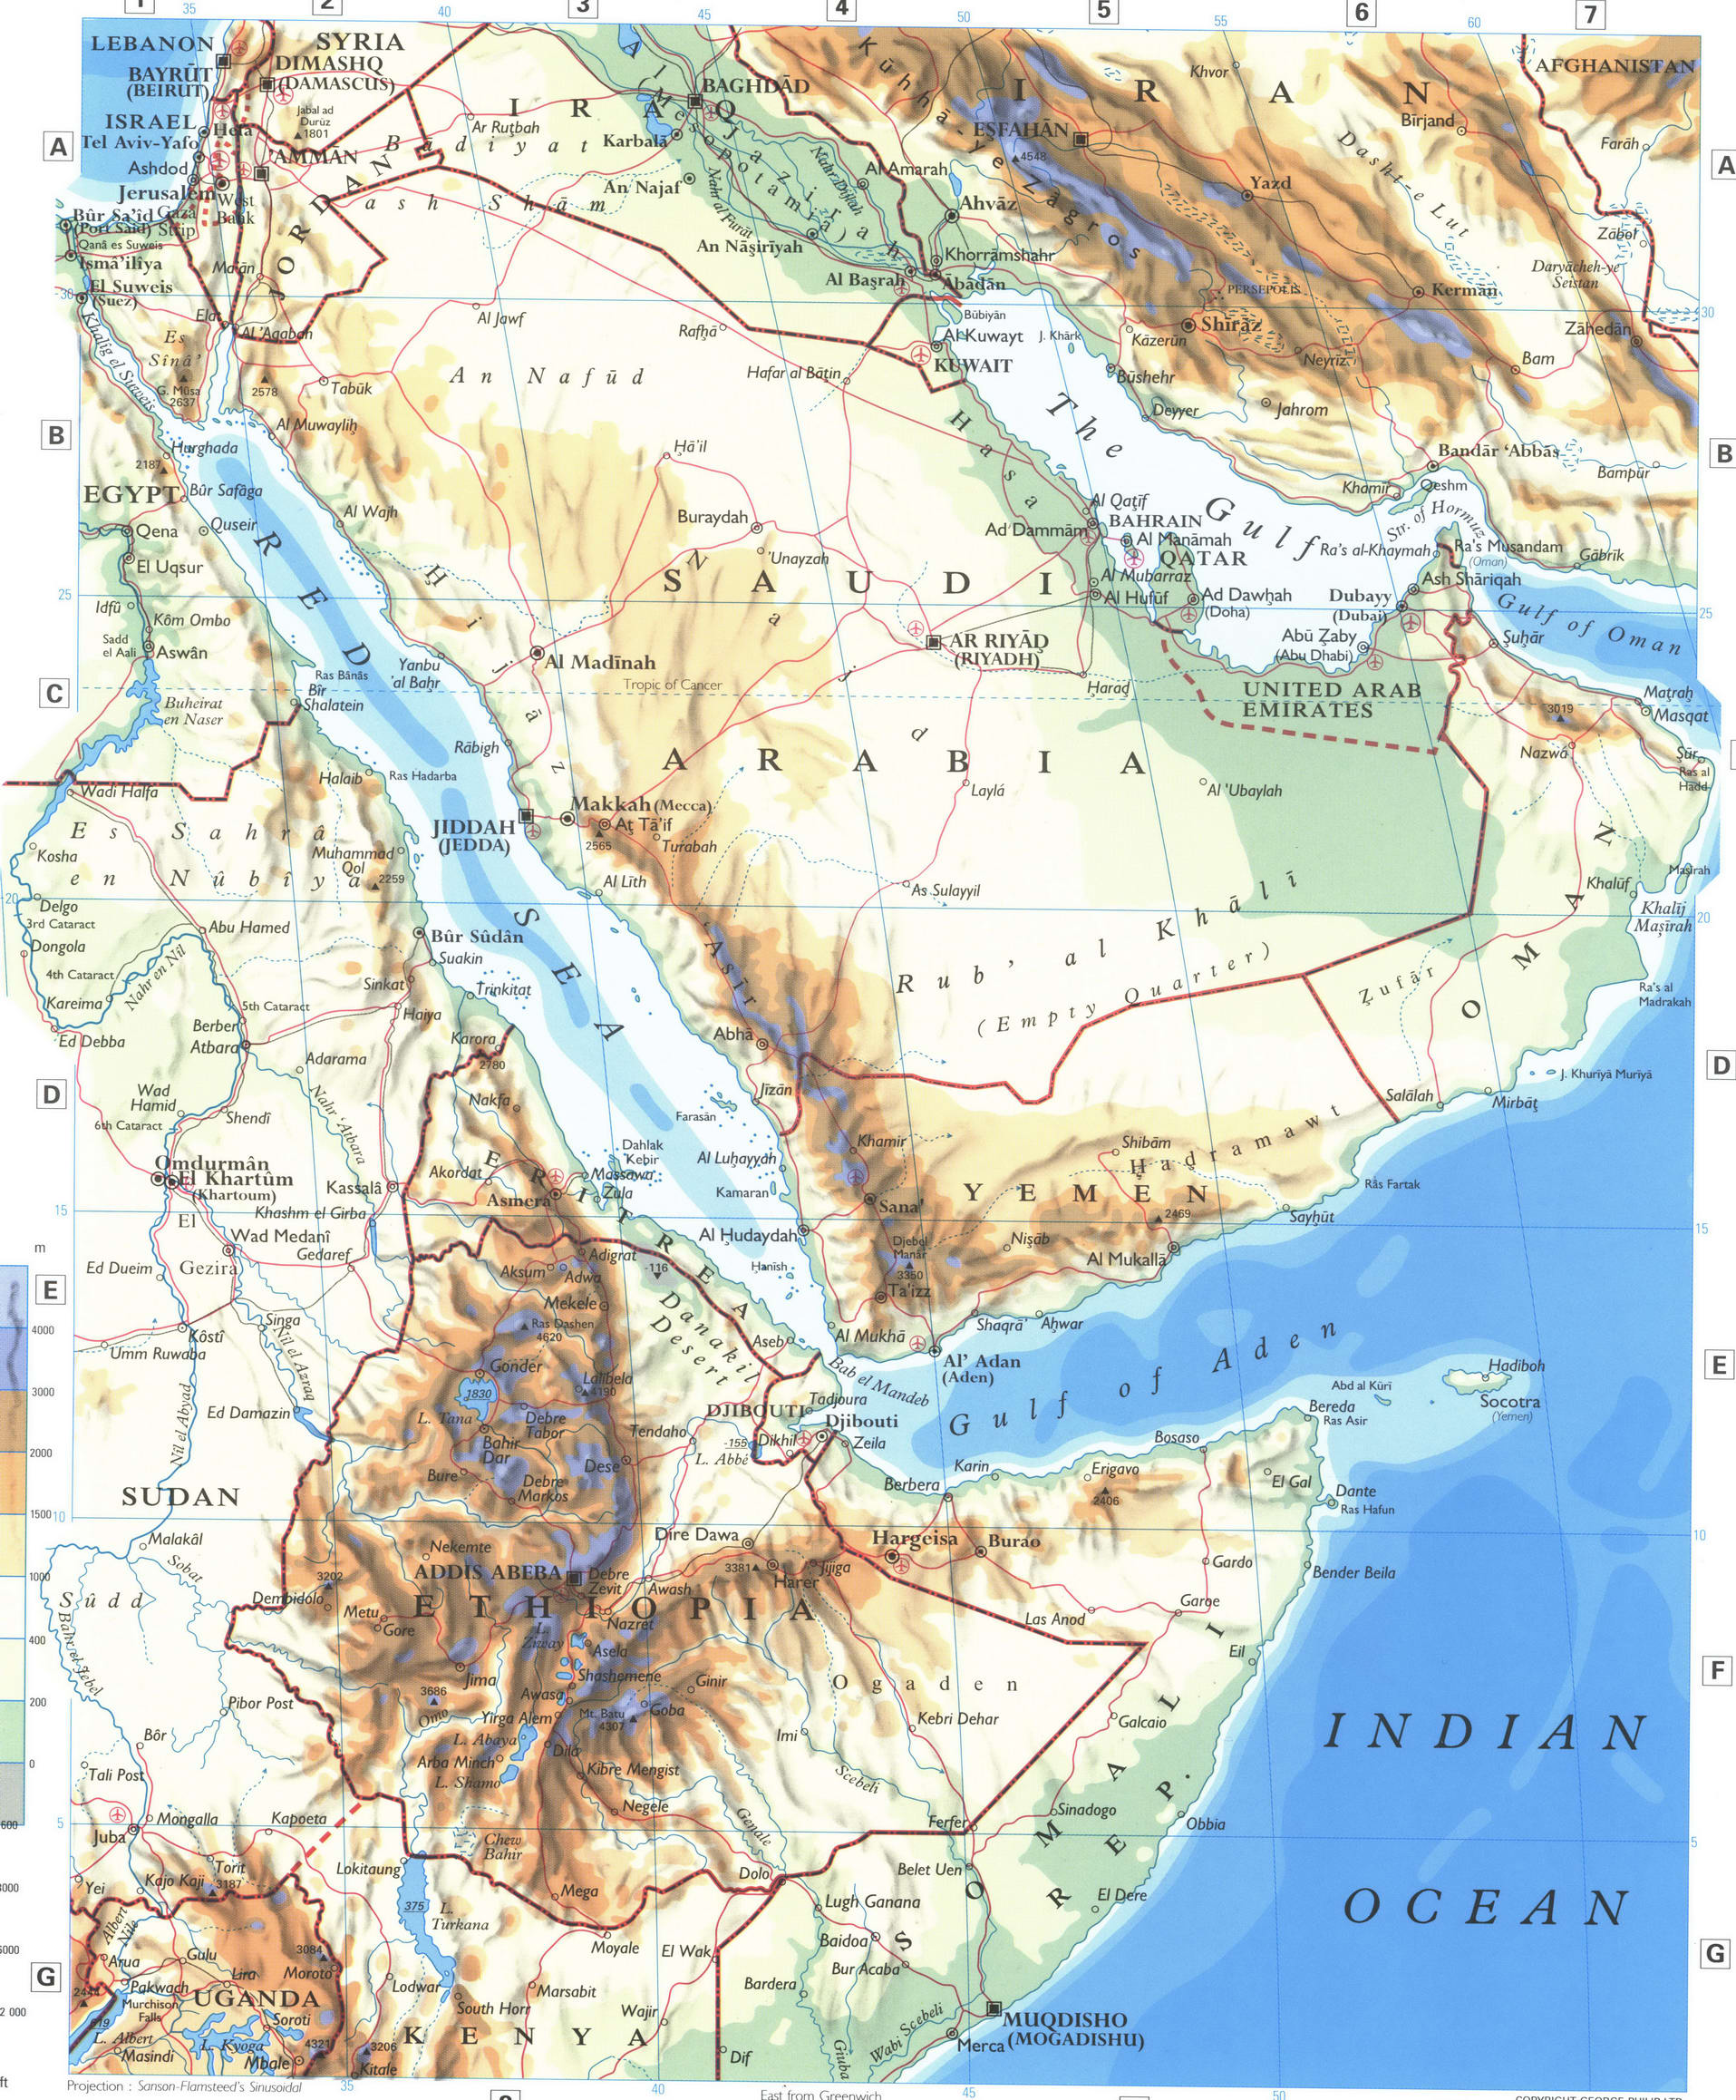 Arabia and The Horn of Africa map